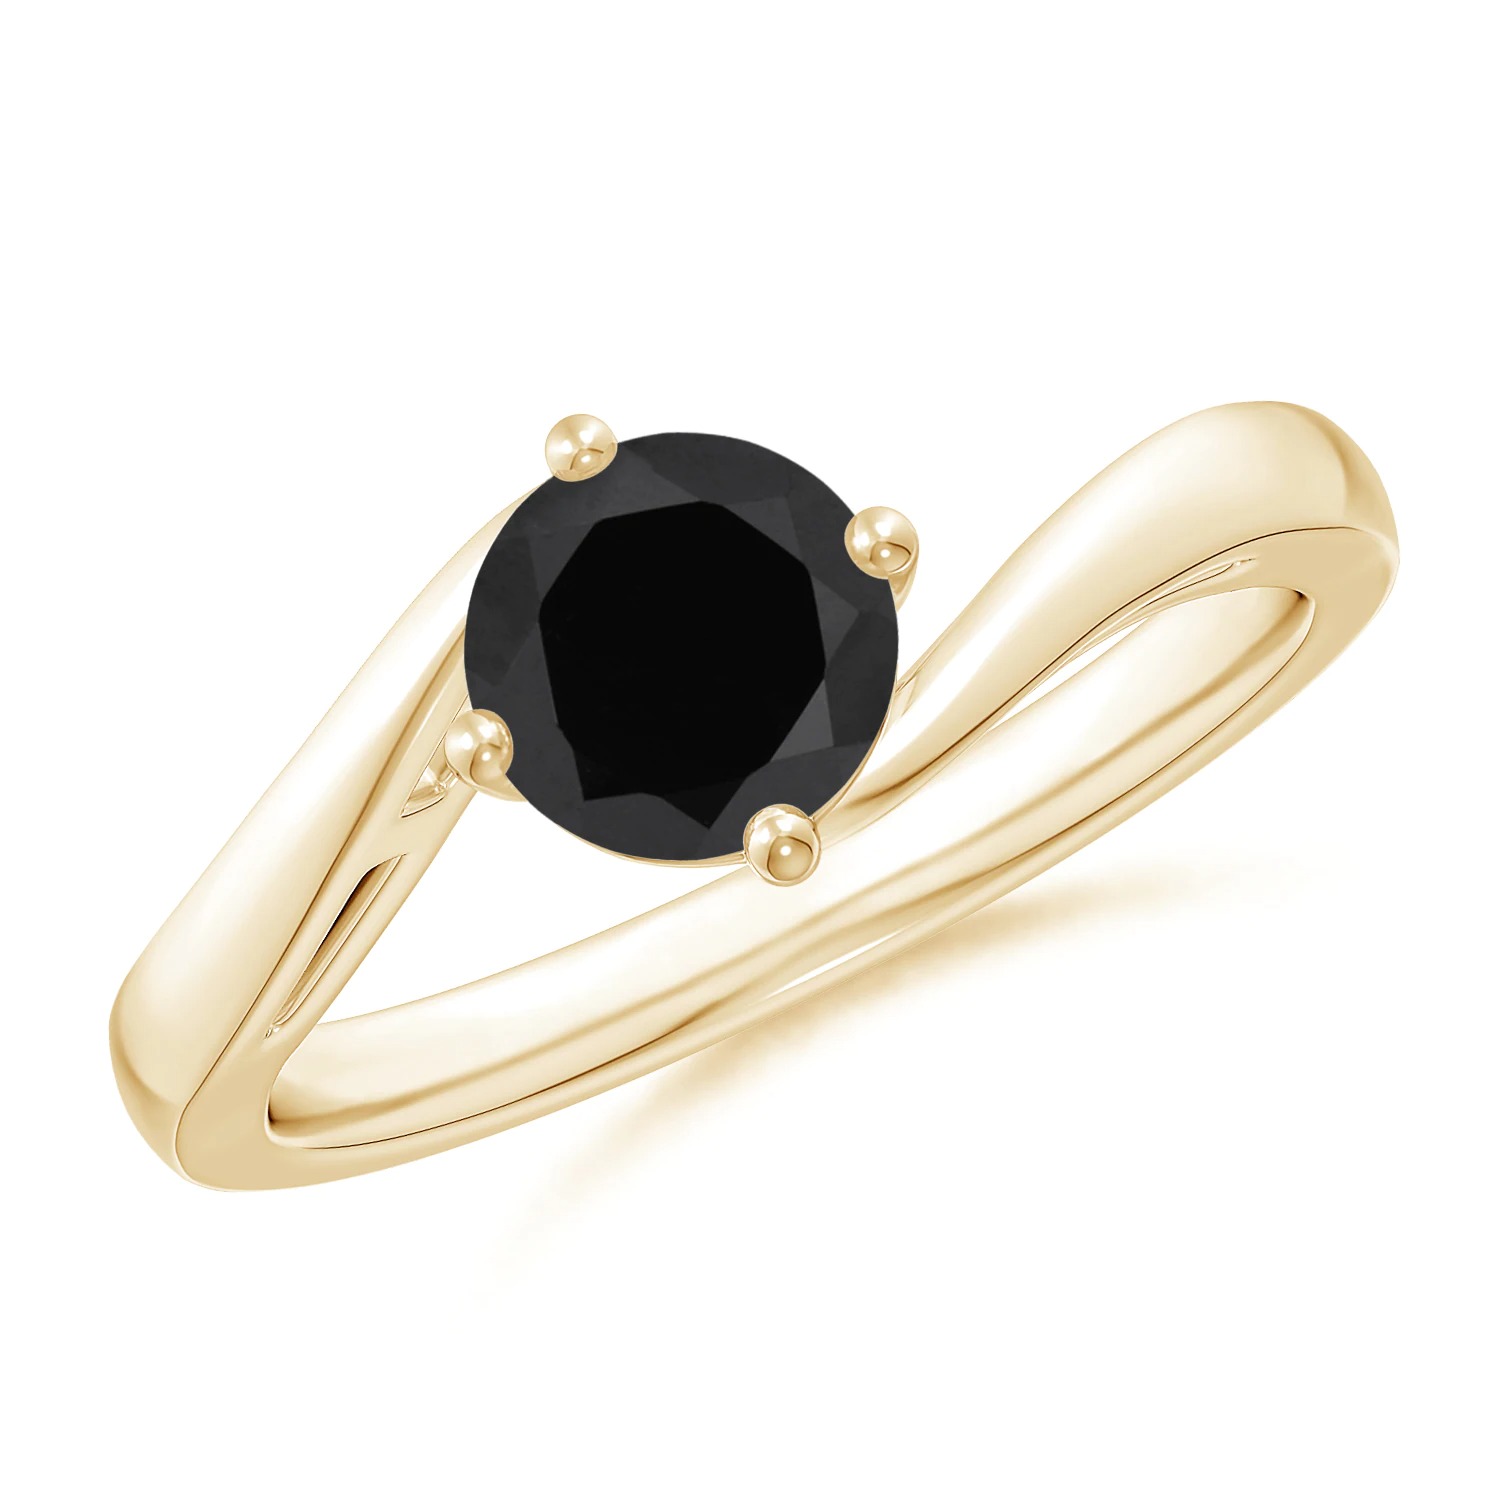 black onyx gemstone bypass engagement ring with a yellow gold band